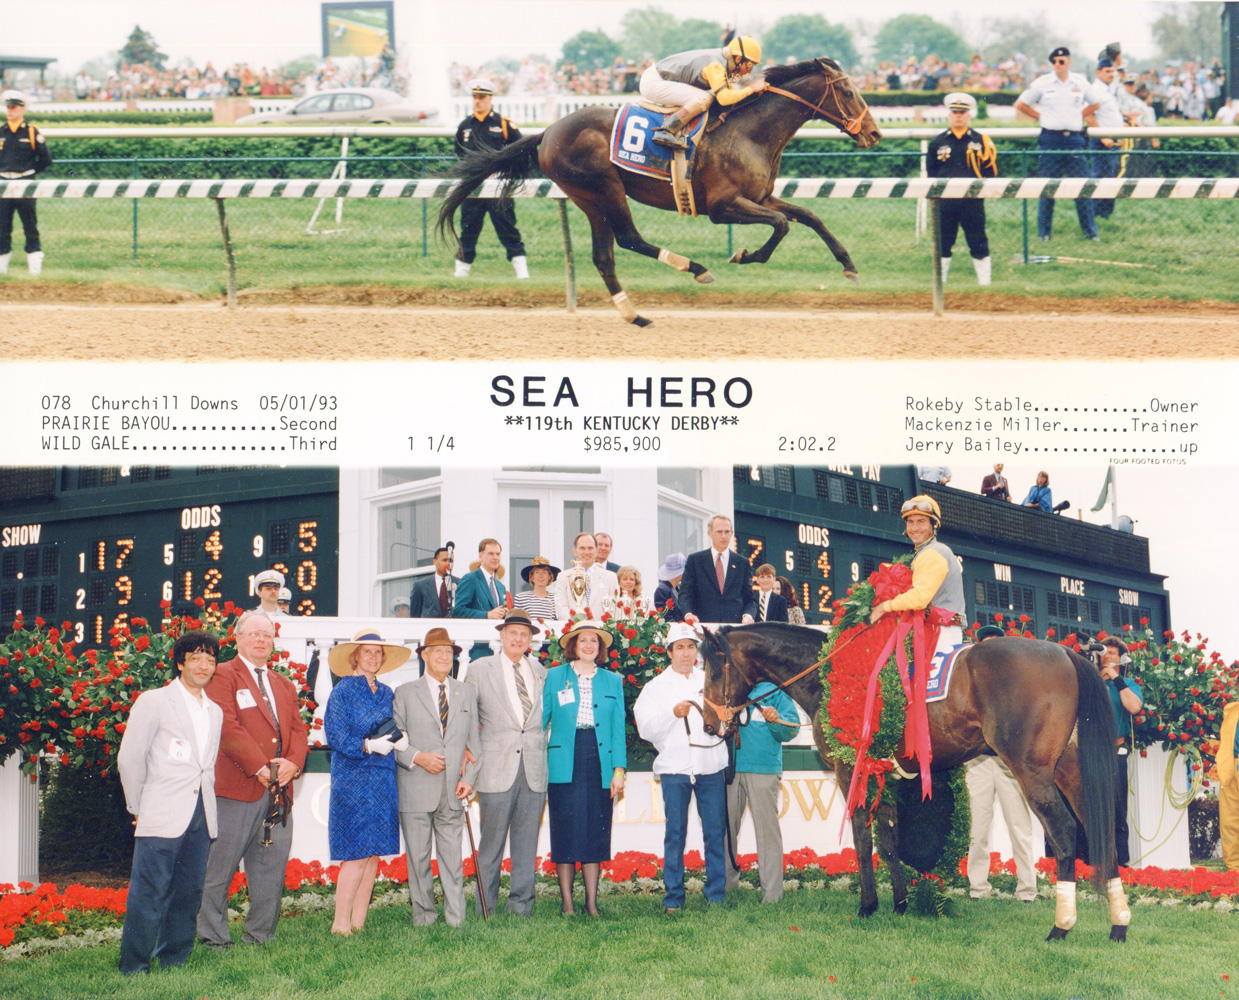 Win composite photograph for the 1993 Kentucky Derby (won by Paul Mellon's Sea Hero) (Four Footed Fotos, Inc./Museum Collection)